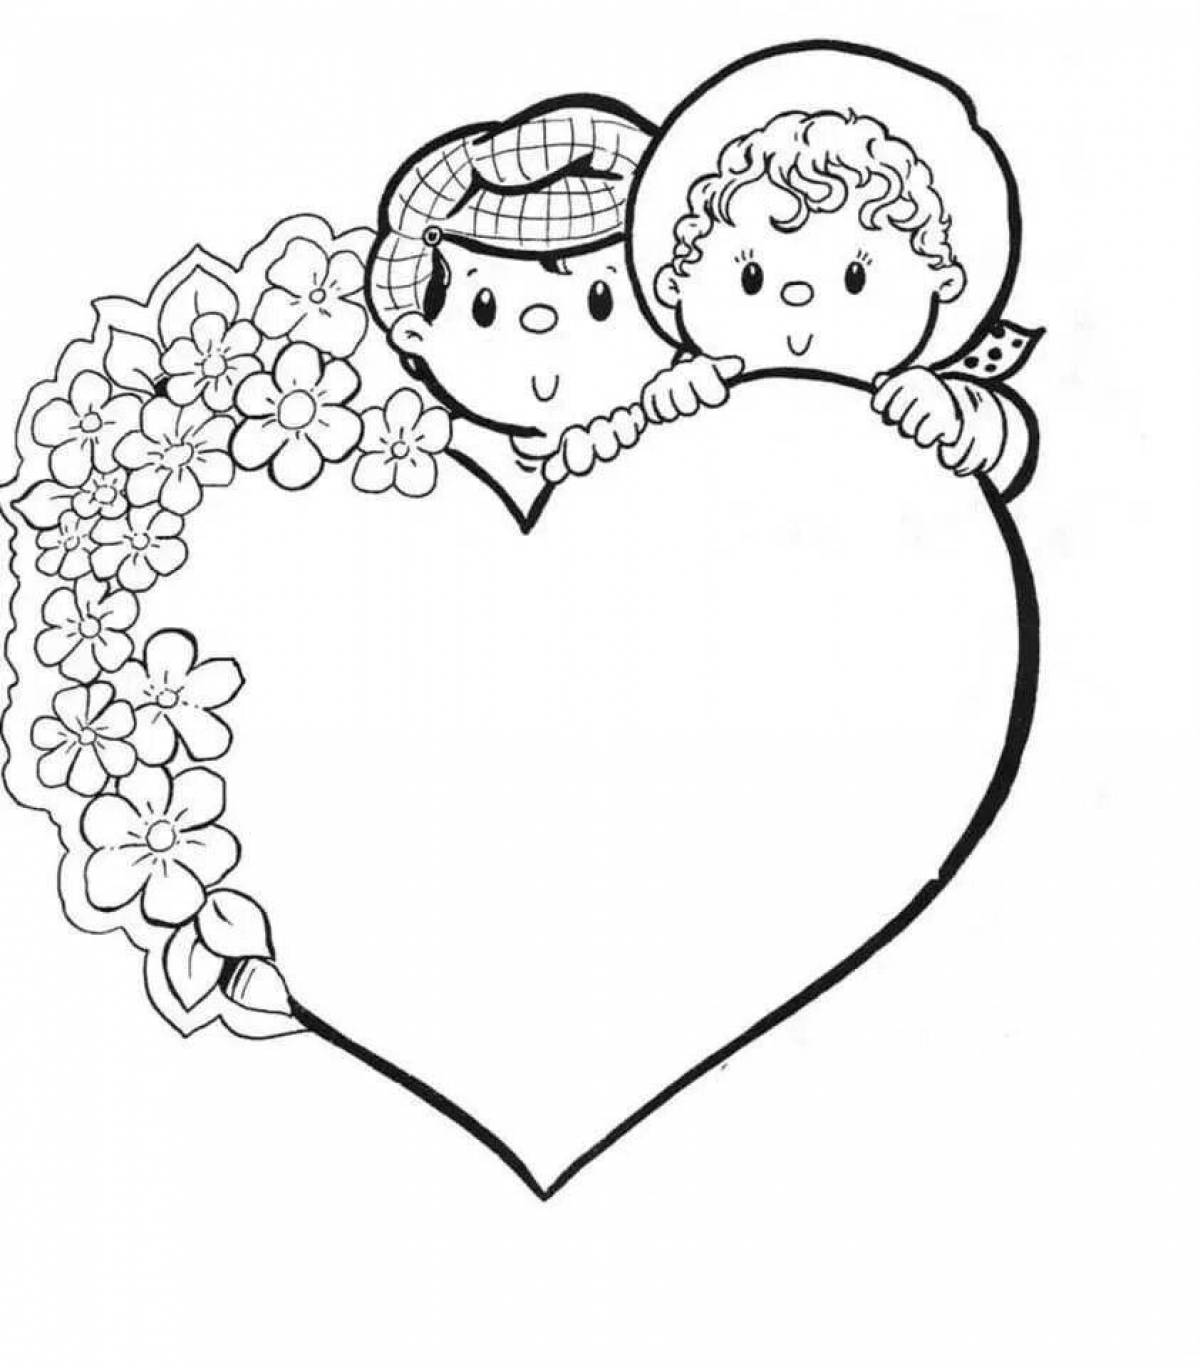 Coloring book shining heart for mom